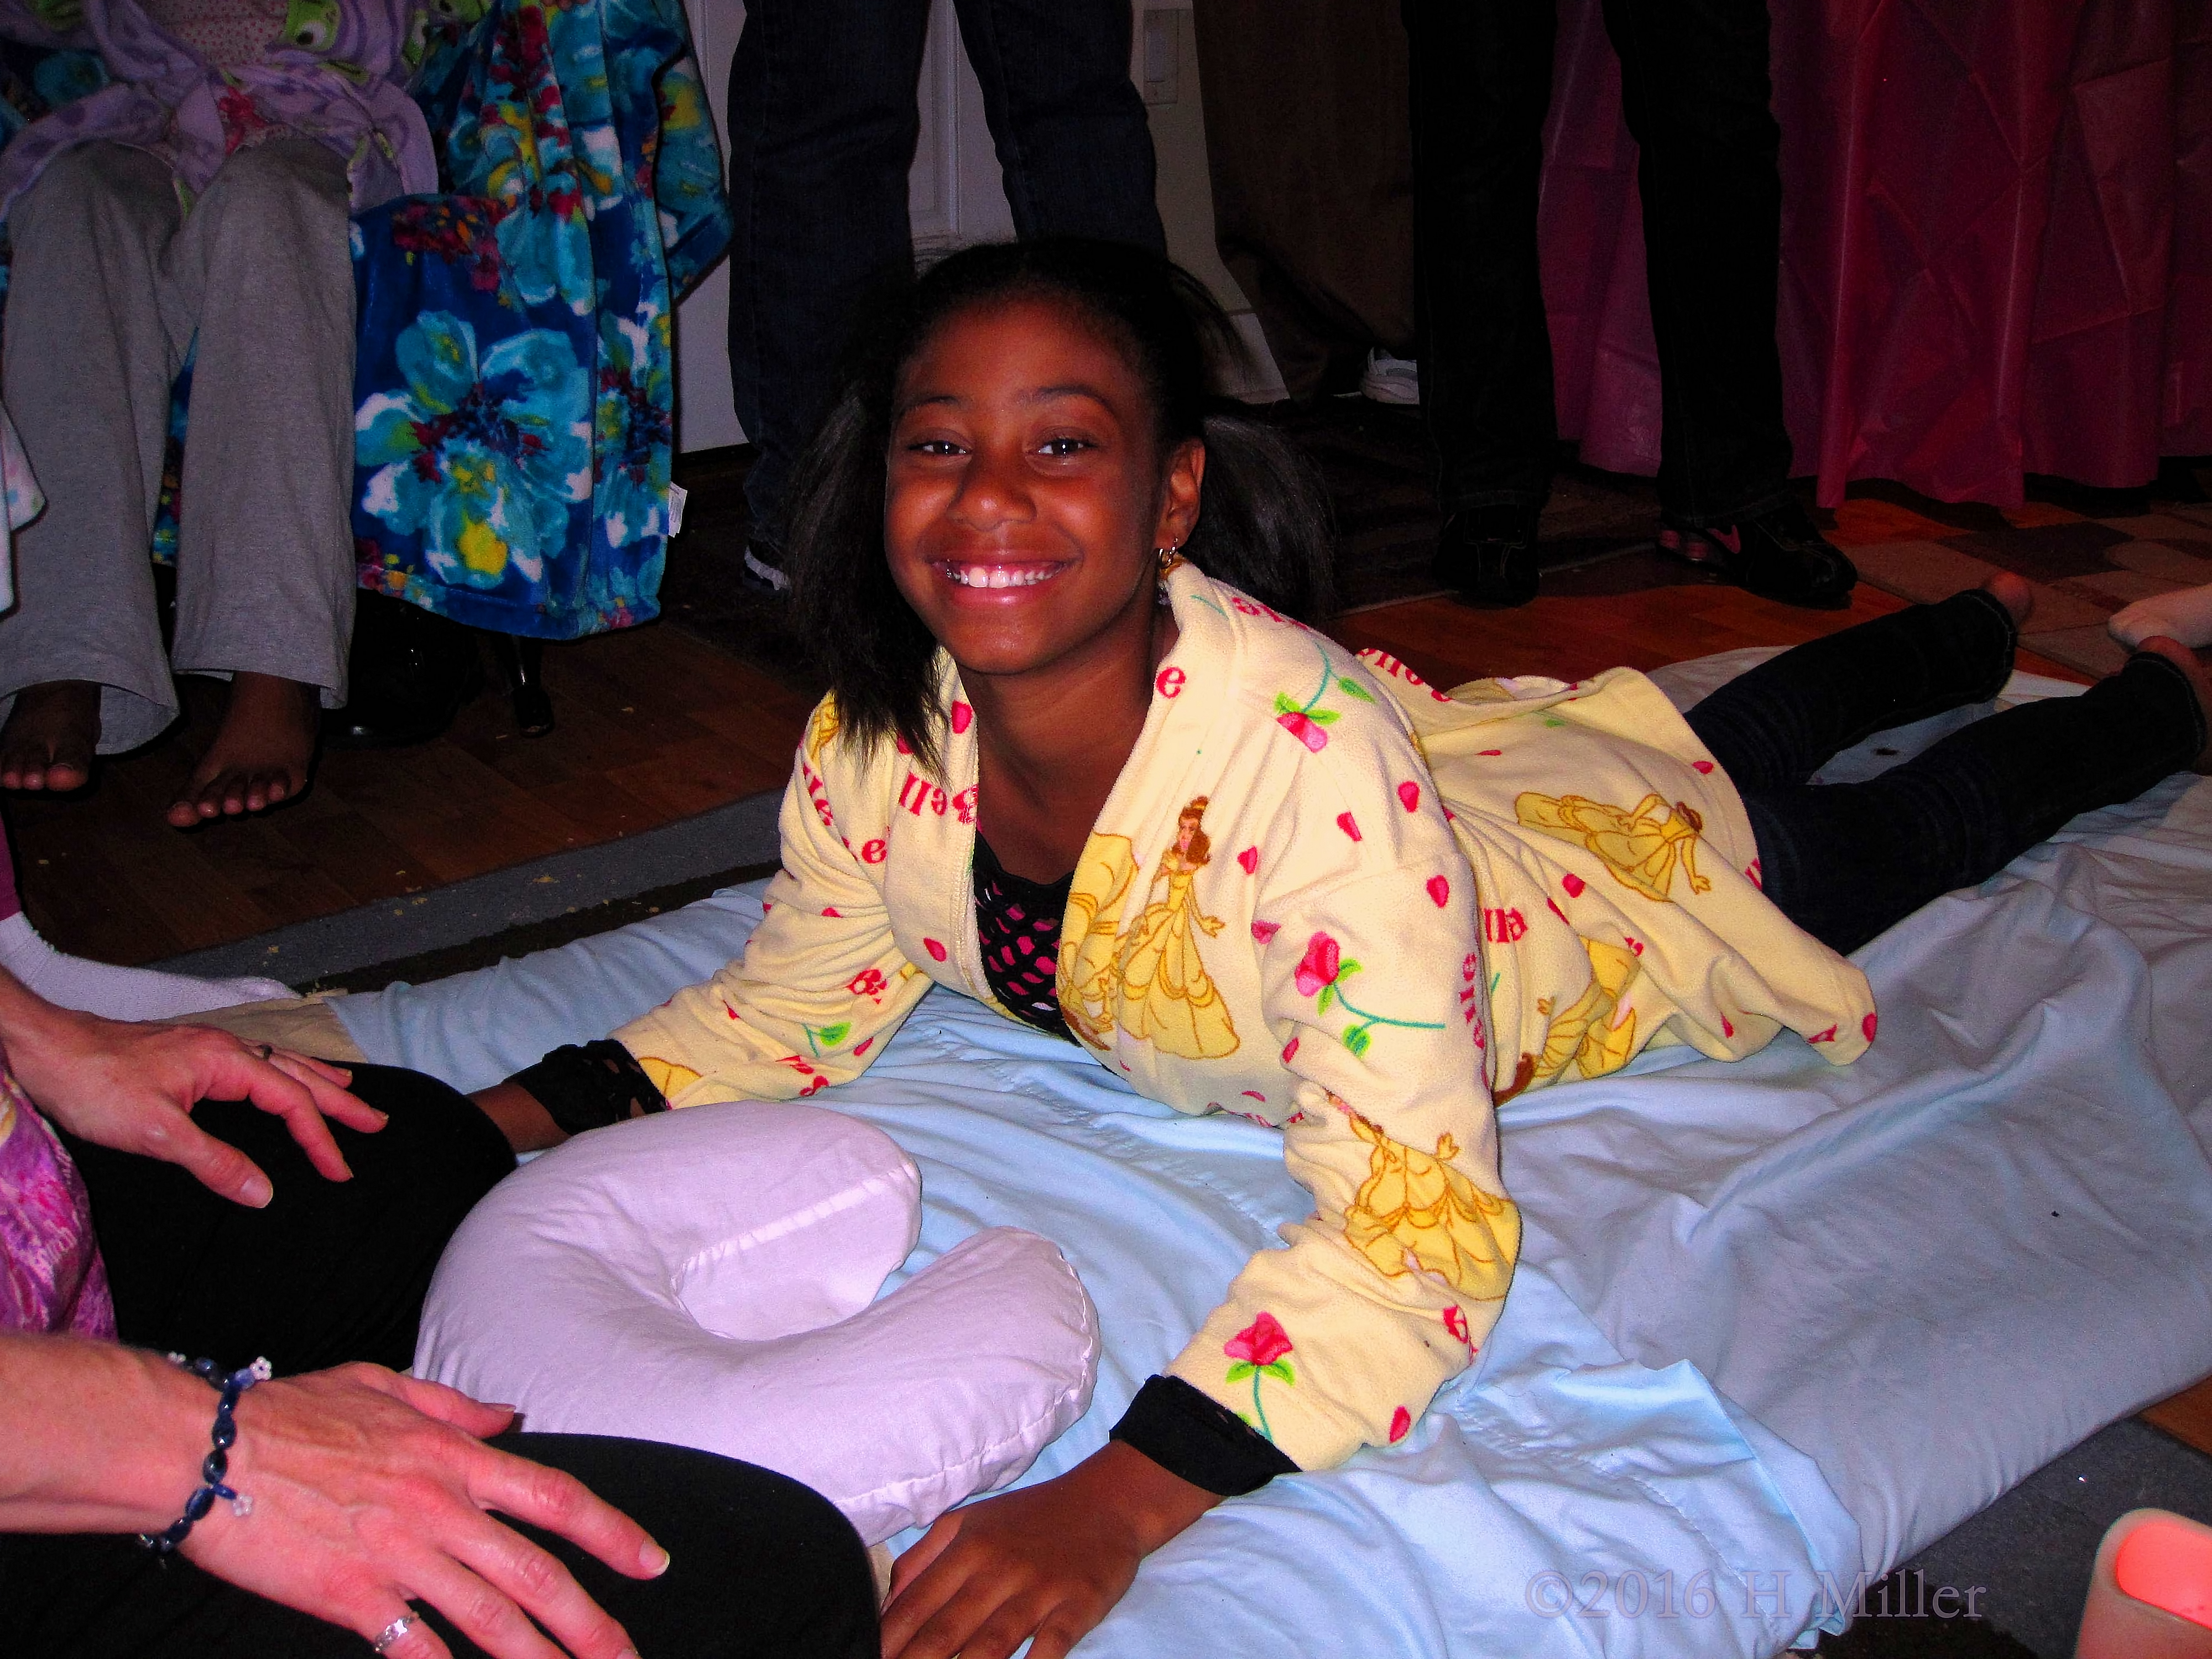 This Party Guest Having Fun At The Spa Party During Kids Massage! 